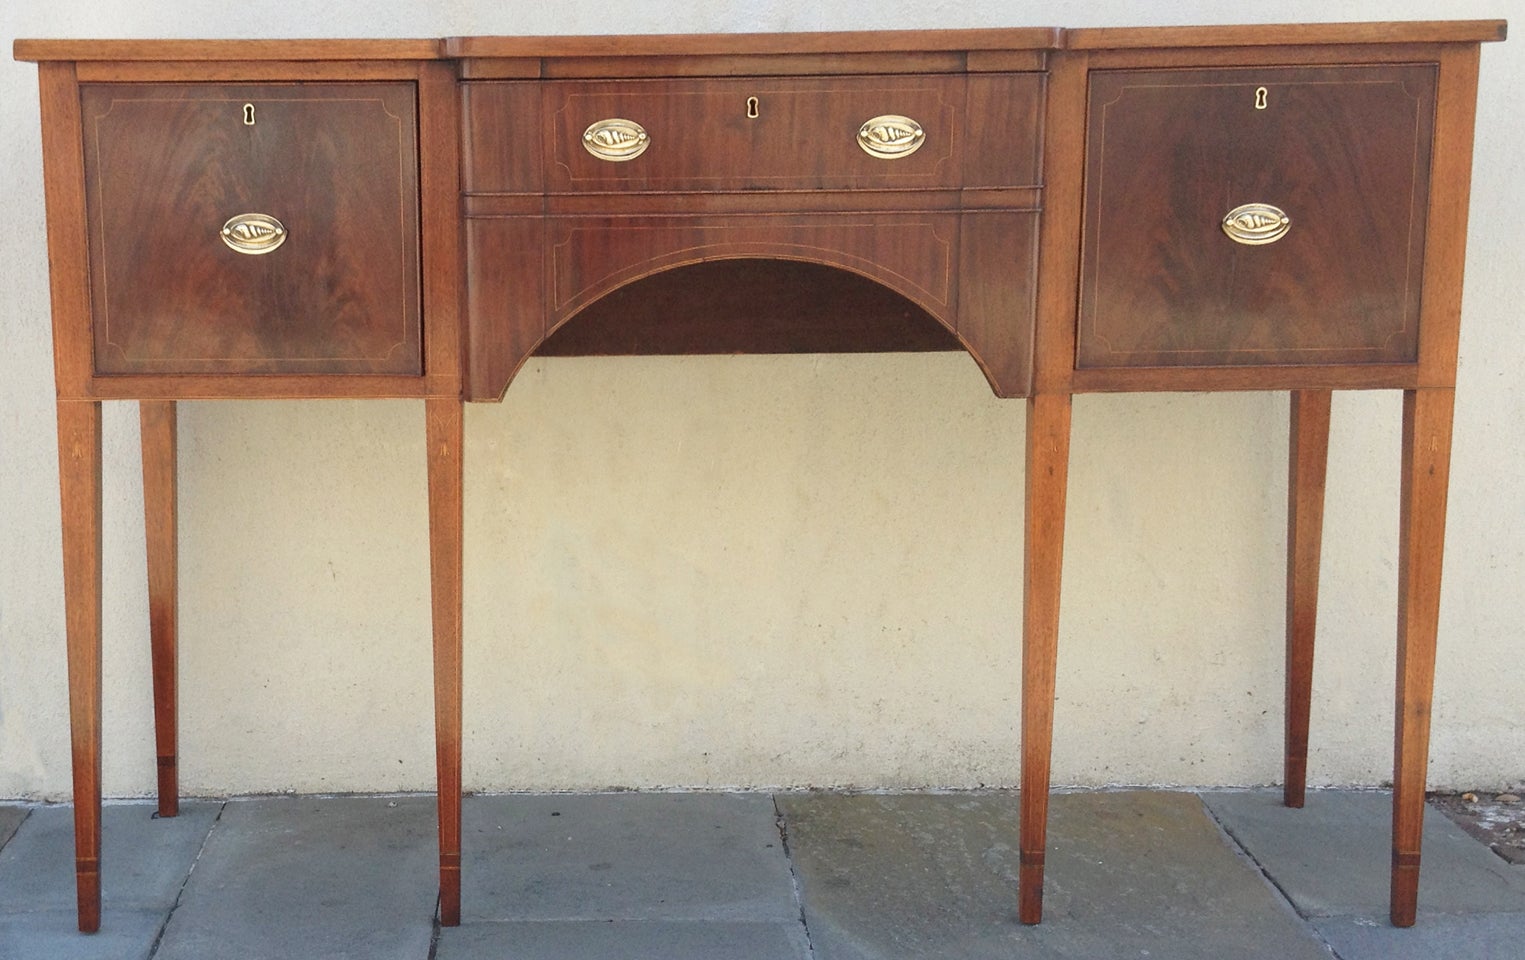 Late 18th century American Sideboard